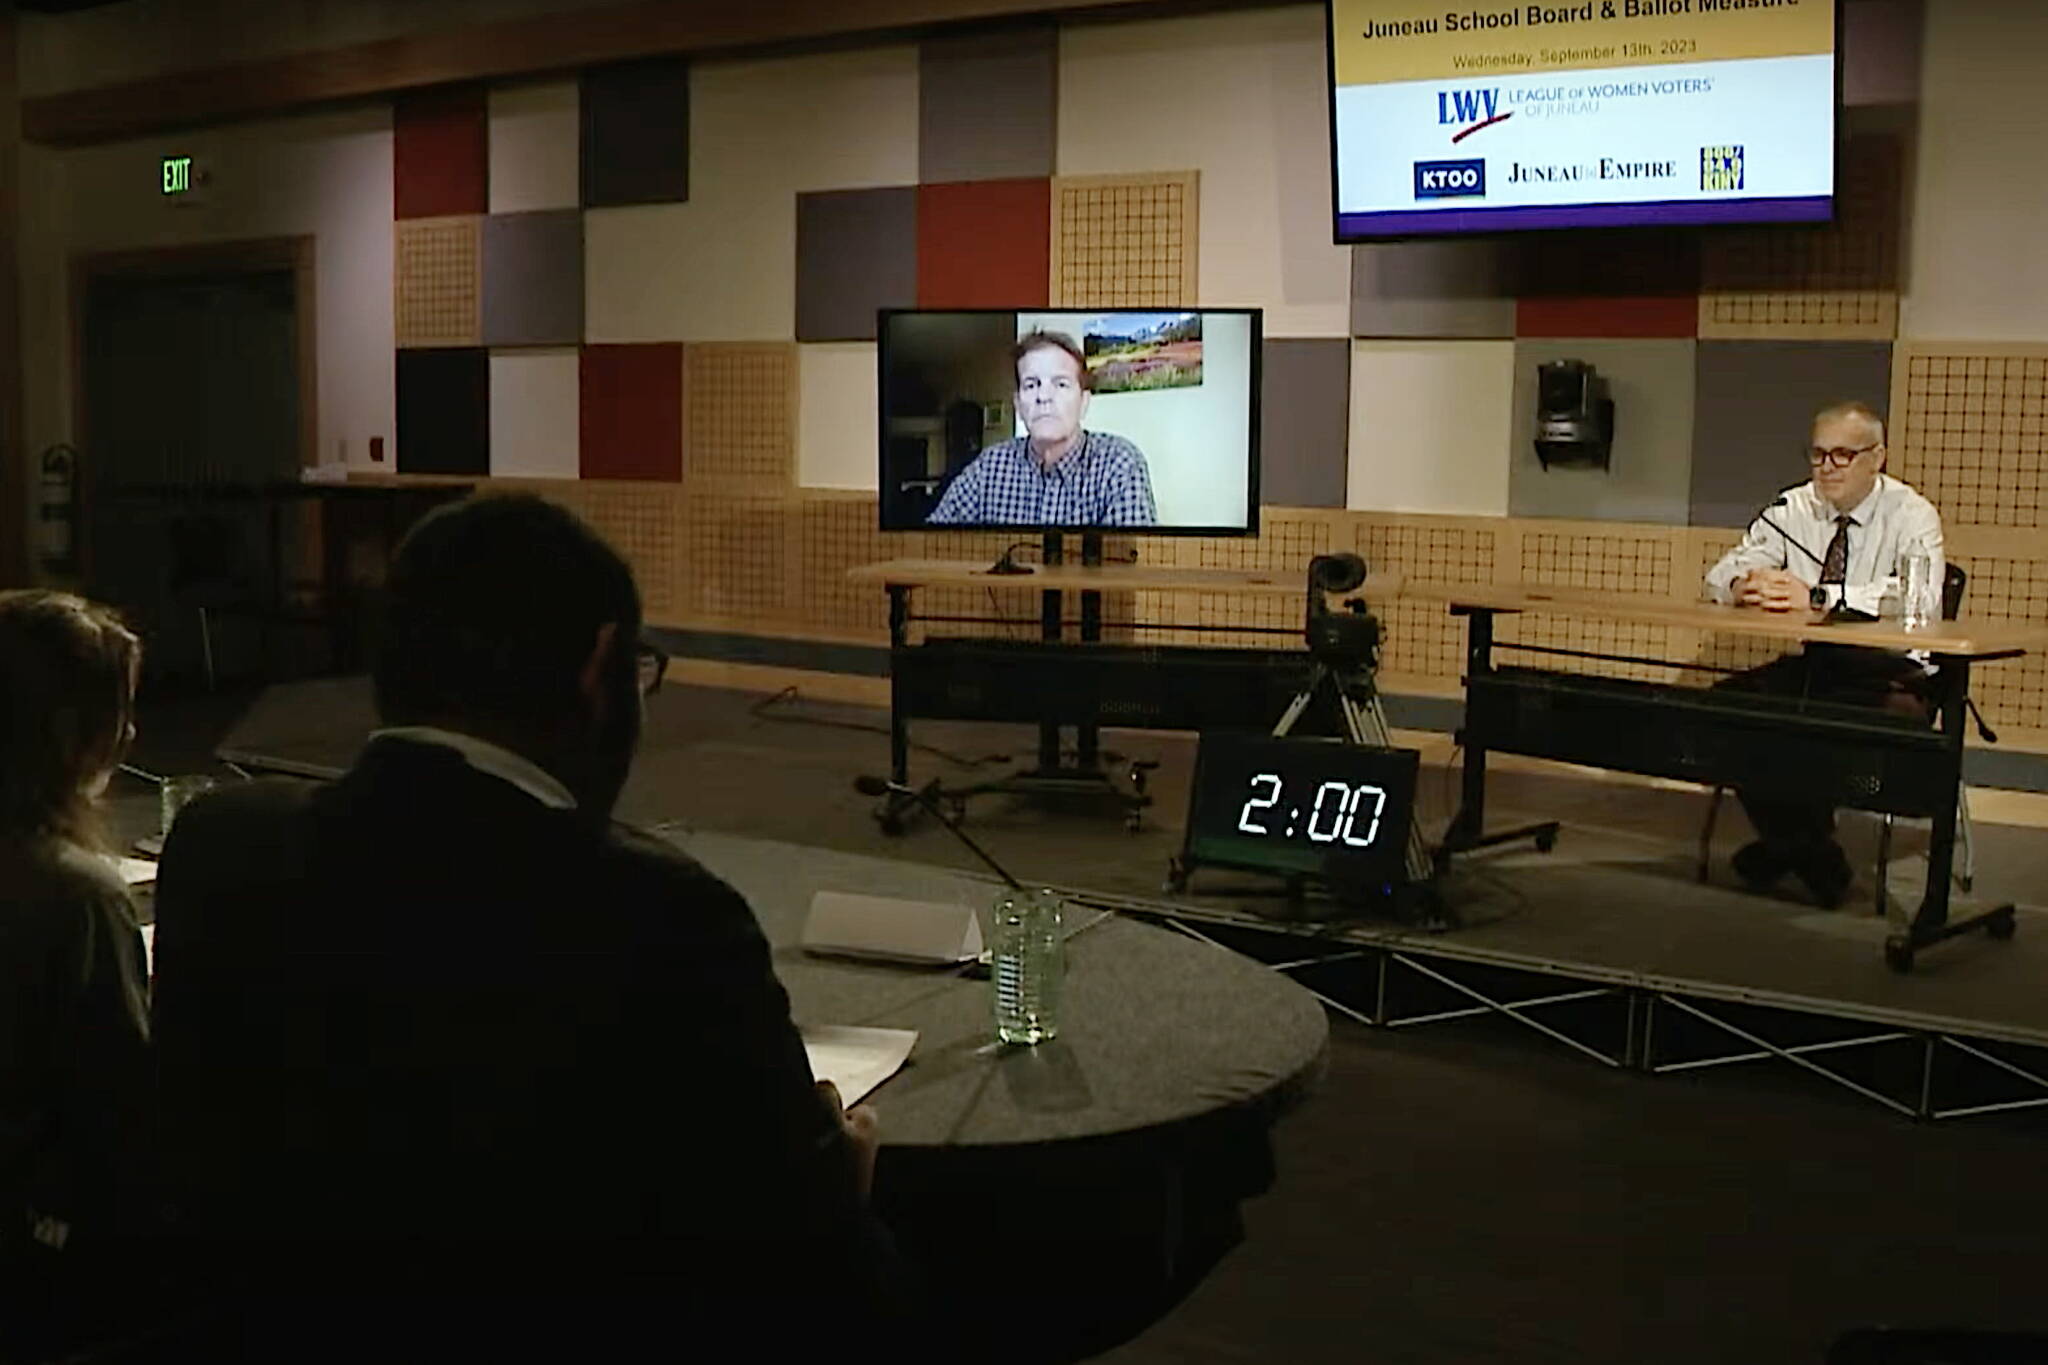 Juneau resident David Ignell, seen via video link, and departing City Manager Rorie Watt discuss a ballot measure asking voters to approve $27 million toward a new City Hall during a forum Wednesday night at the KTOO studio. (Screenshot from official video of forum)